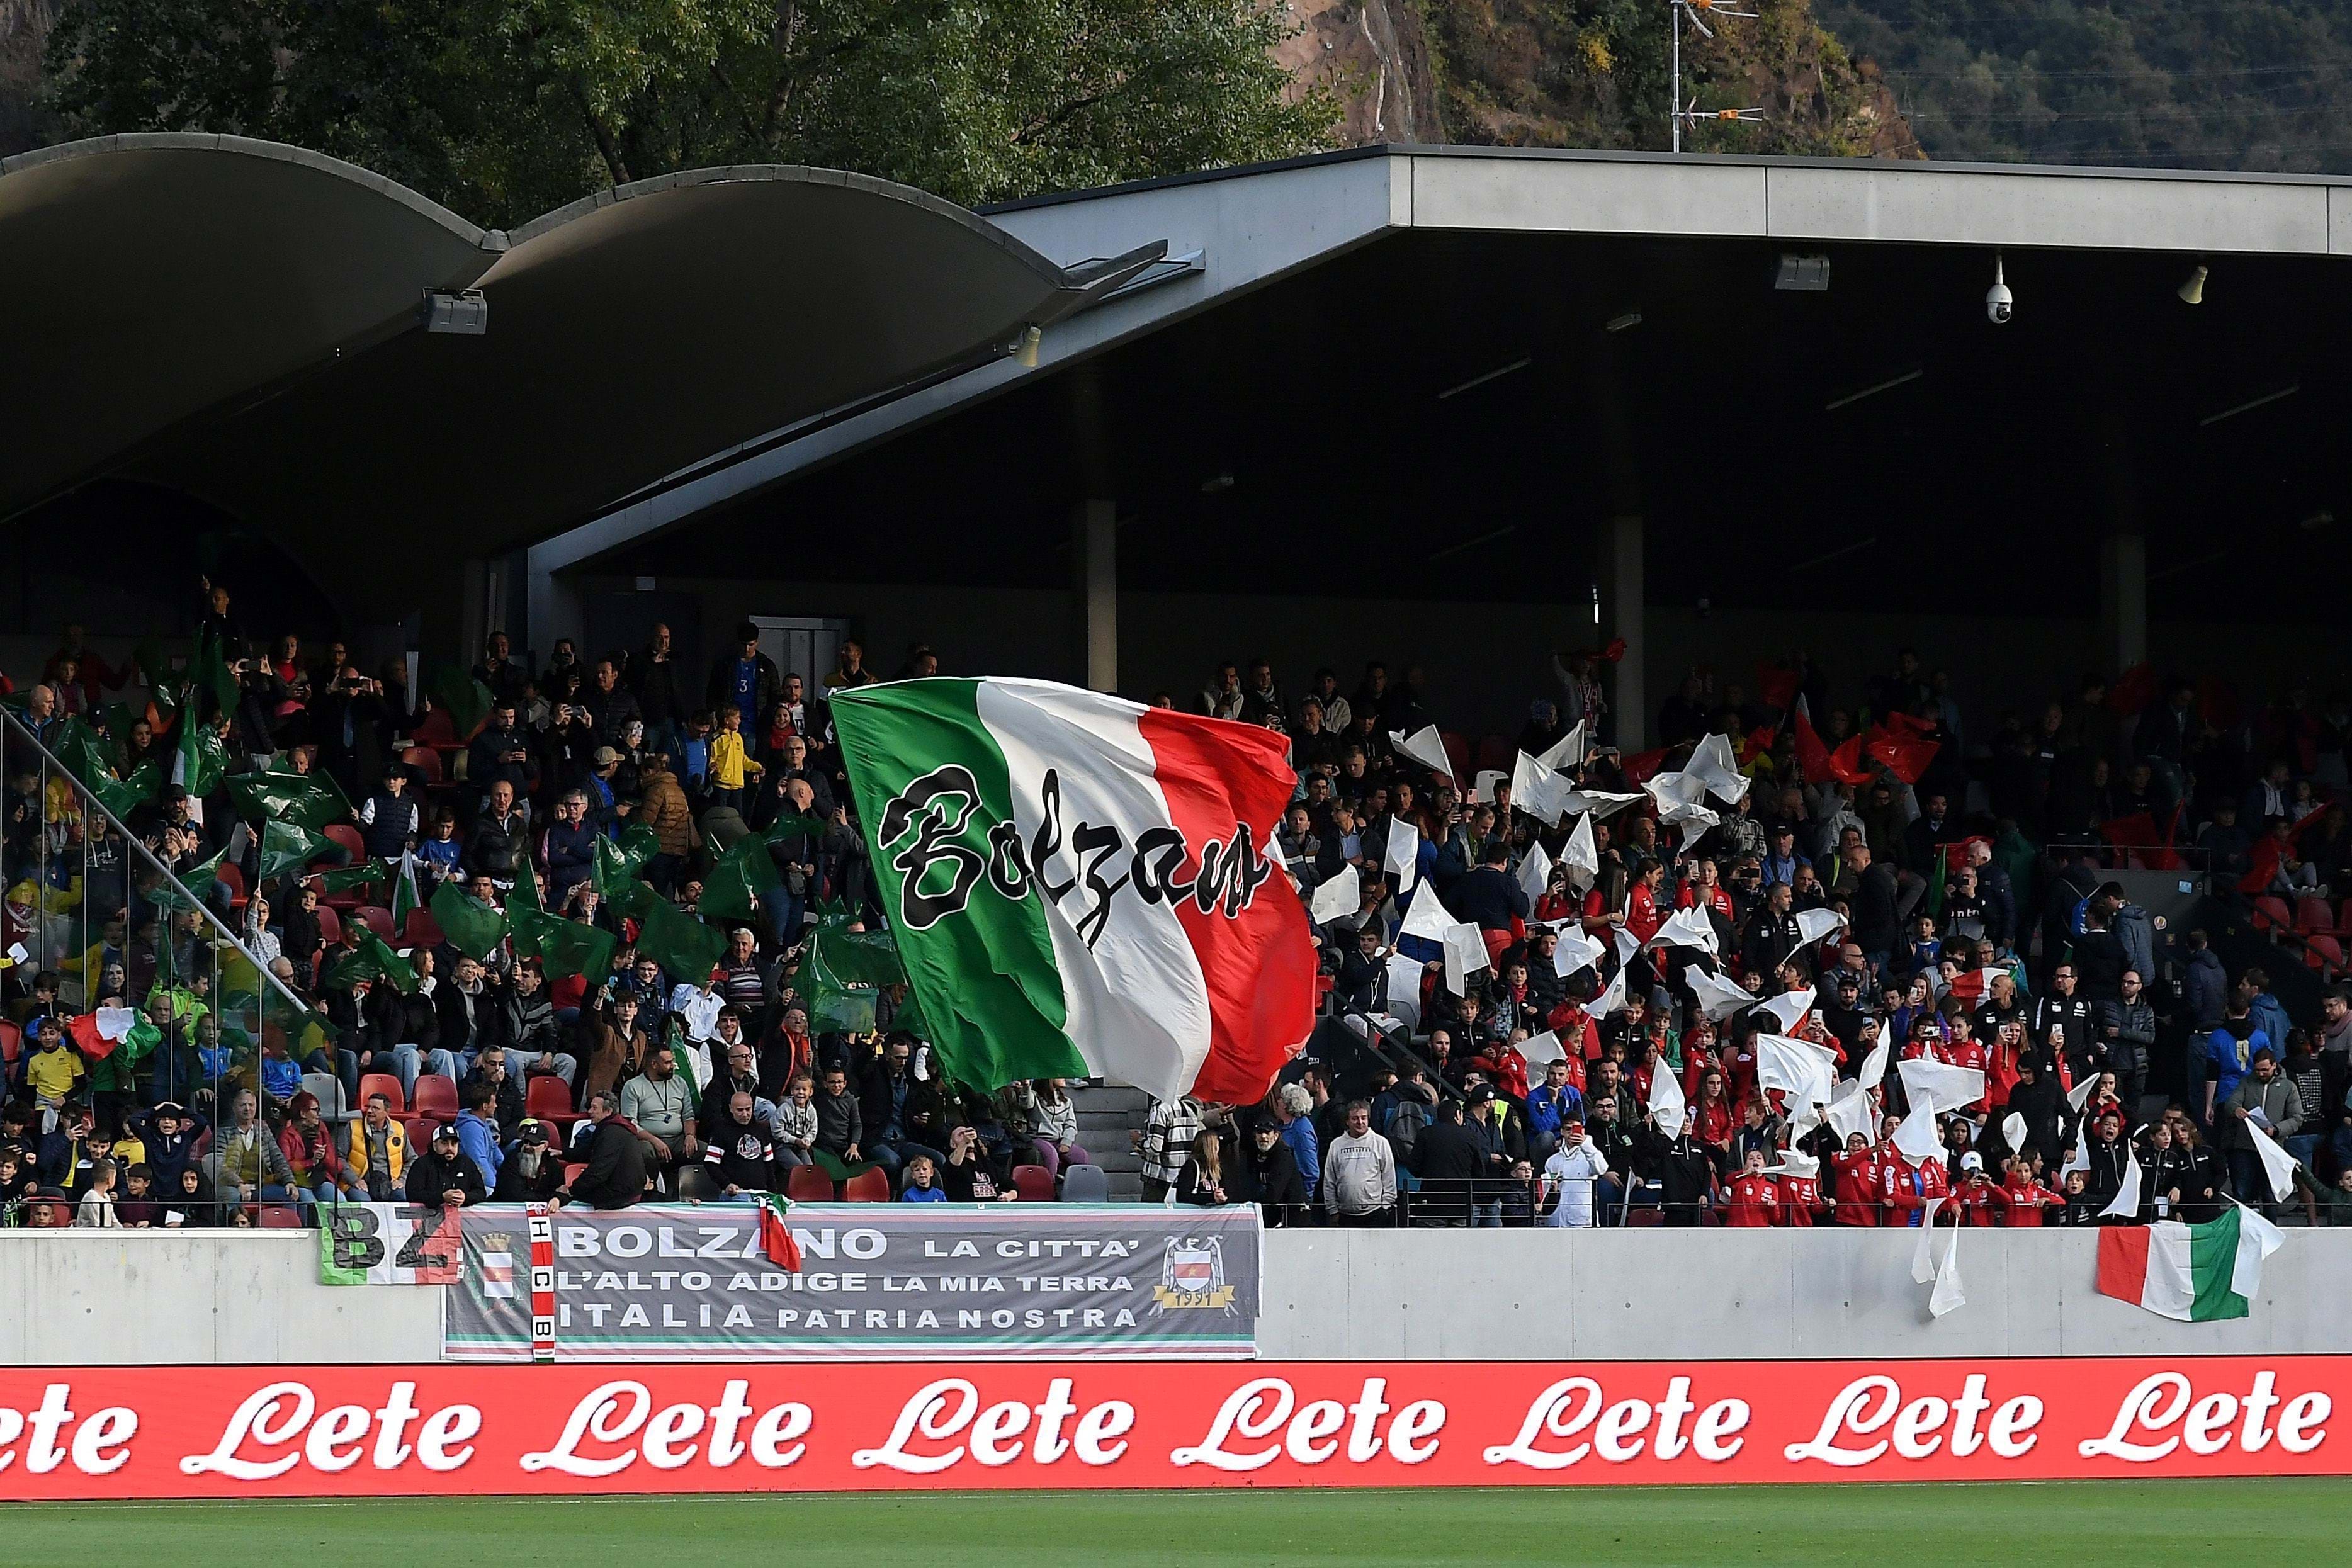  EURO 2025, last group-stage qualifier against Finland on 16 July in Bolzano